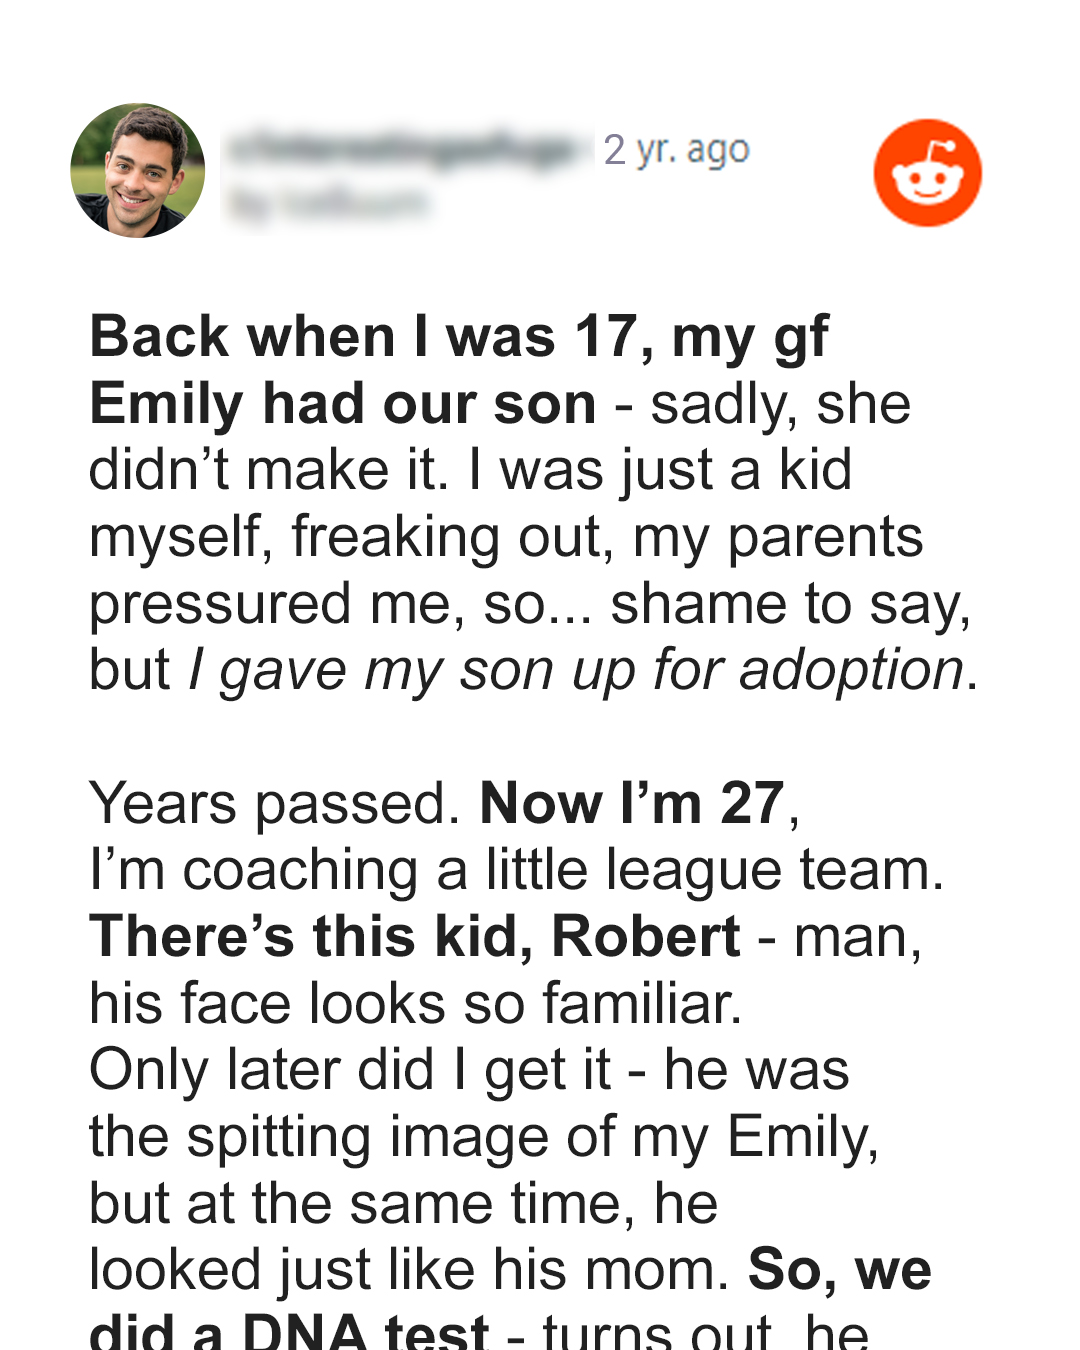 Teen Boy Puts His Newborn Son up for Adoption, Years Later He Accidentally Meets Him